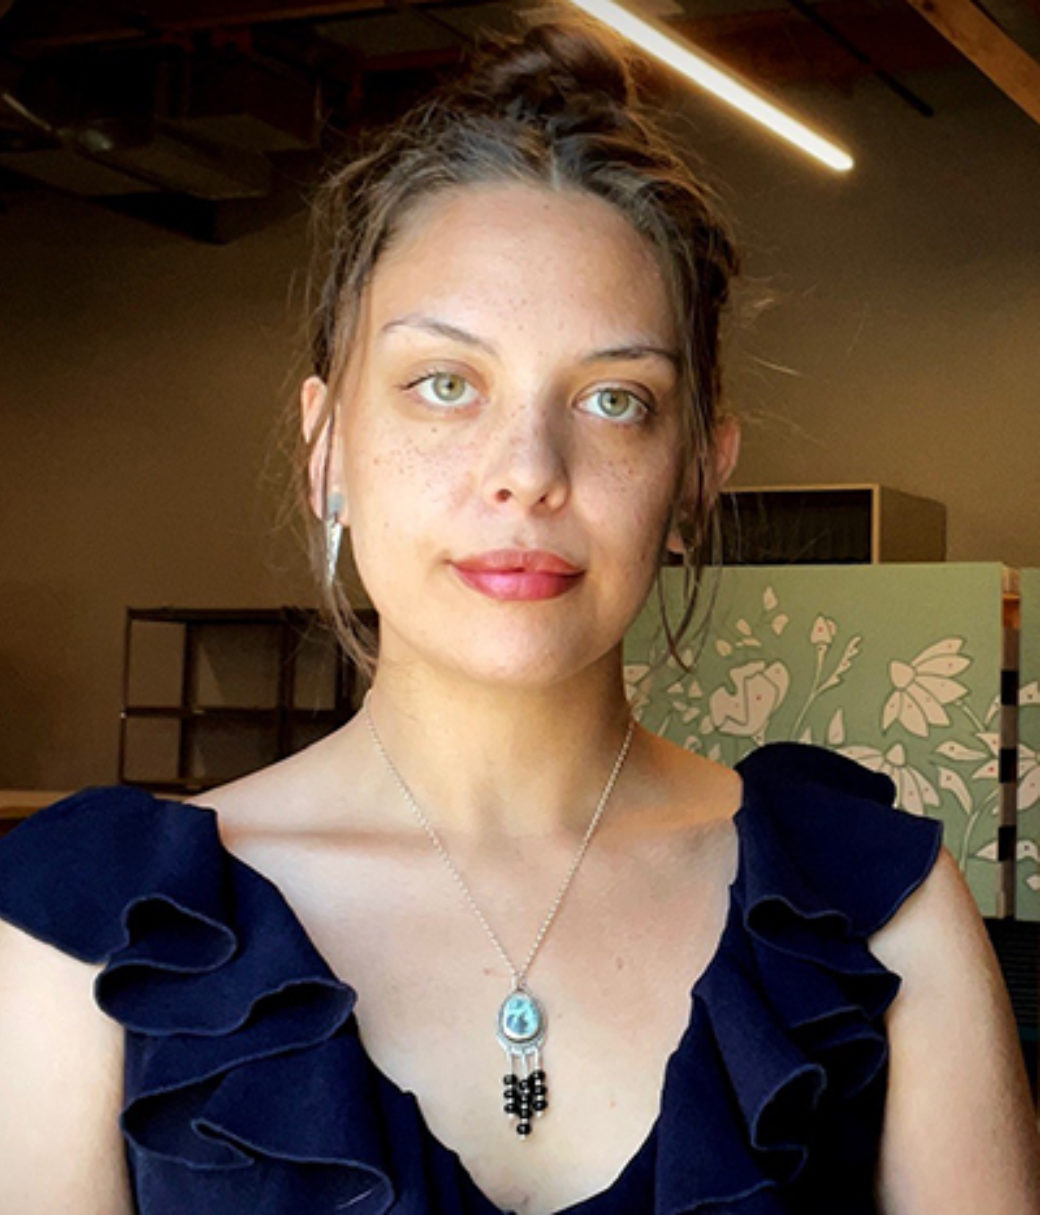 Color photo of a woman wearing a blue shirt and a custom-made jewelry piece smirks at the camera.